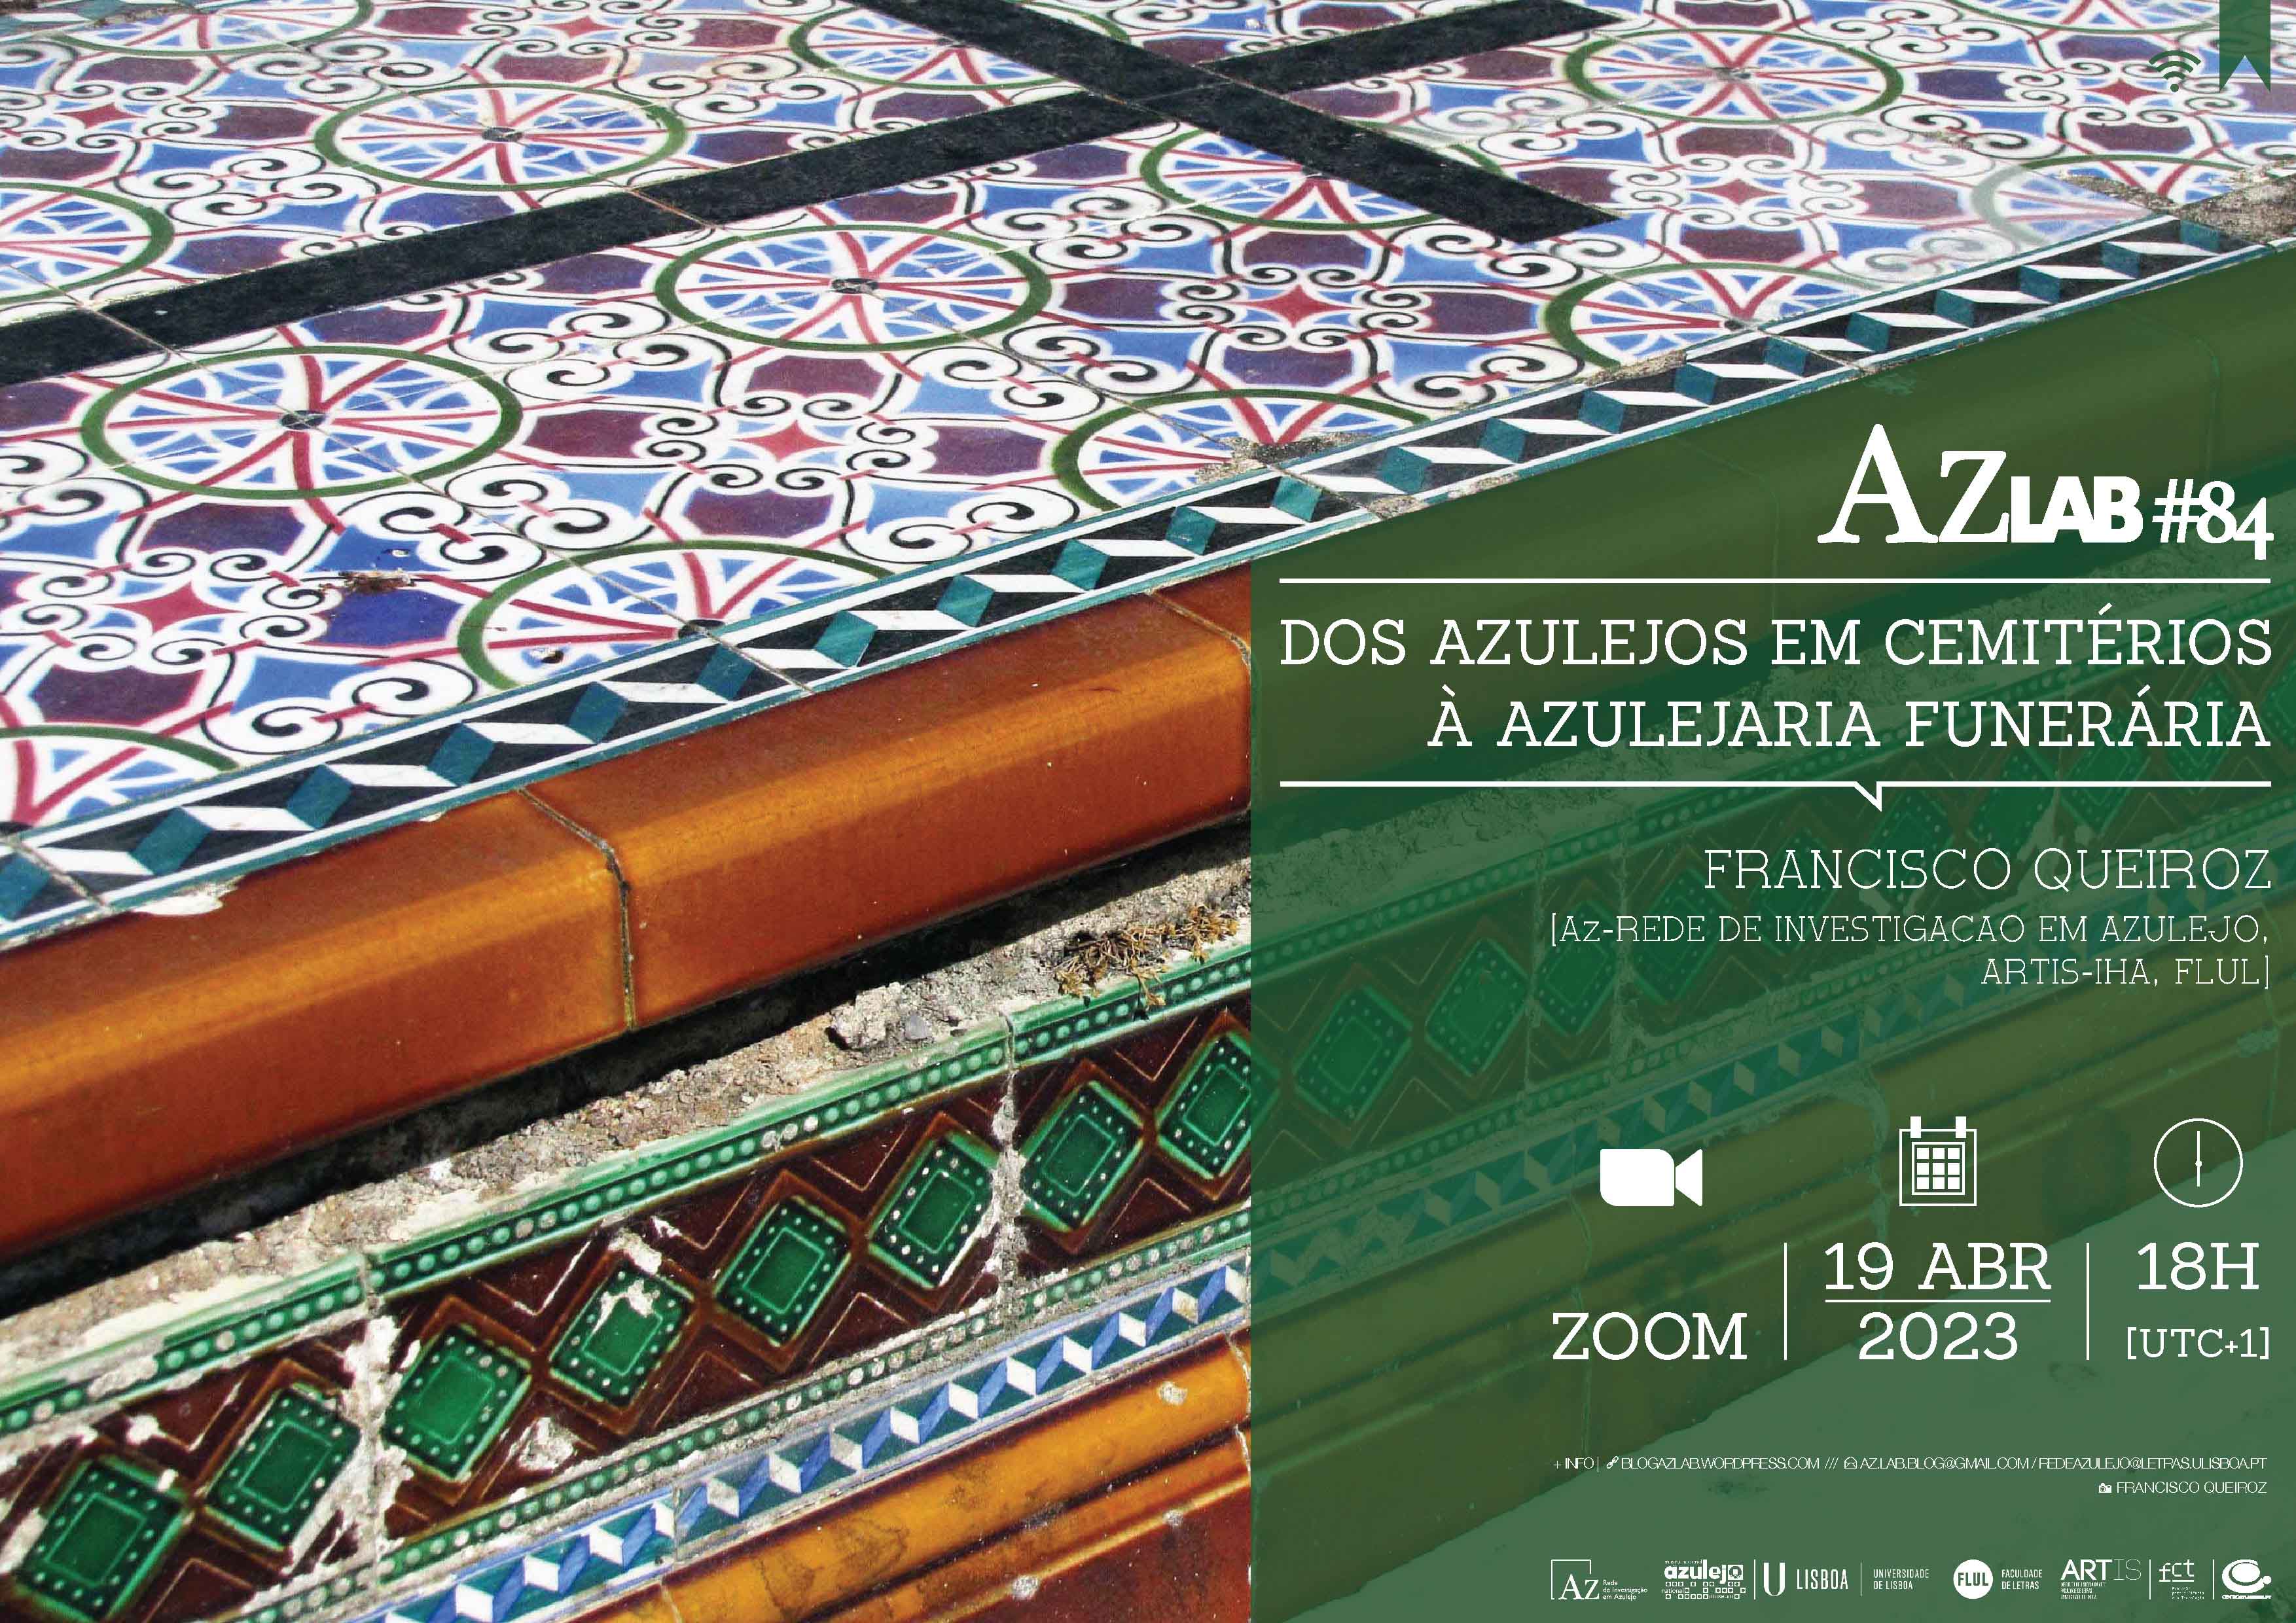 AZLAB#84 | FROM AZULEJOS IN CEMETERIES TO FUNERARY TILE COVERINGS